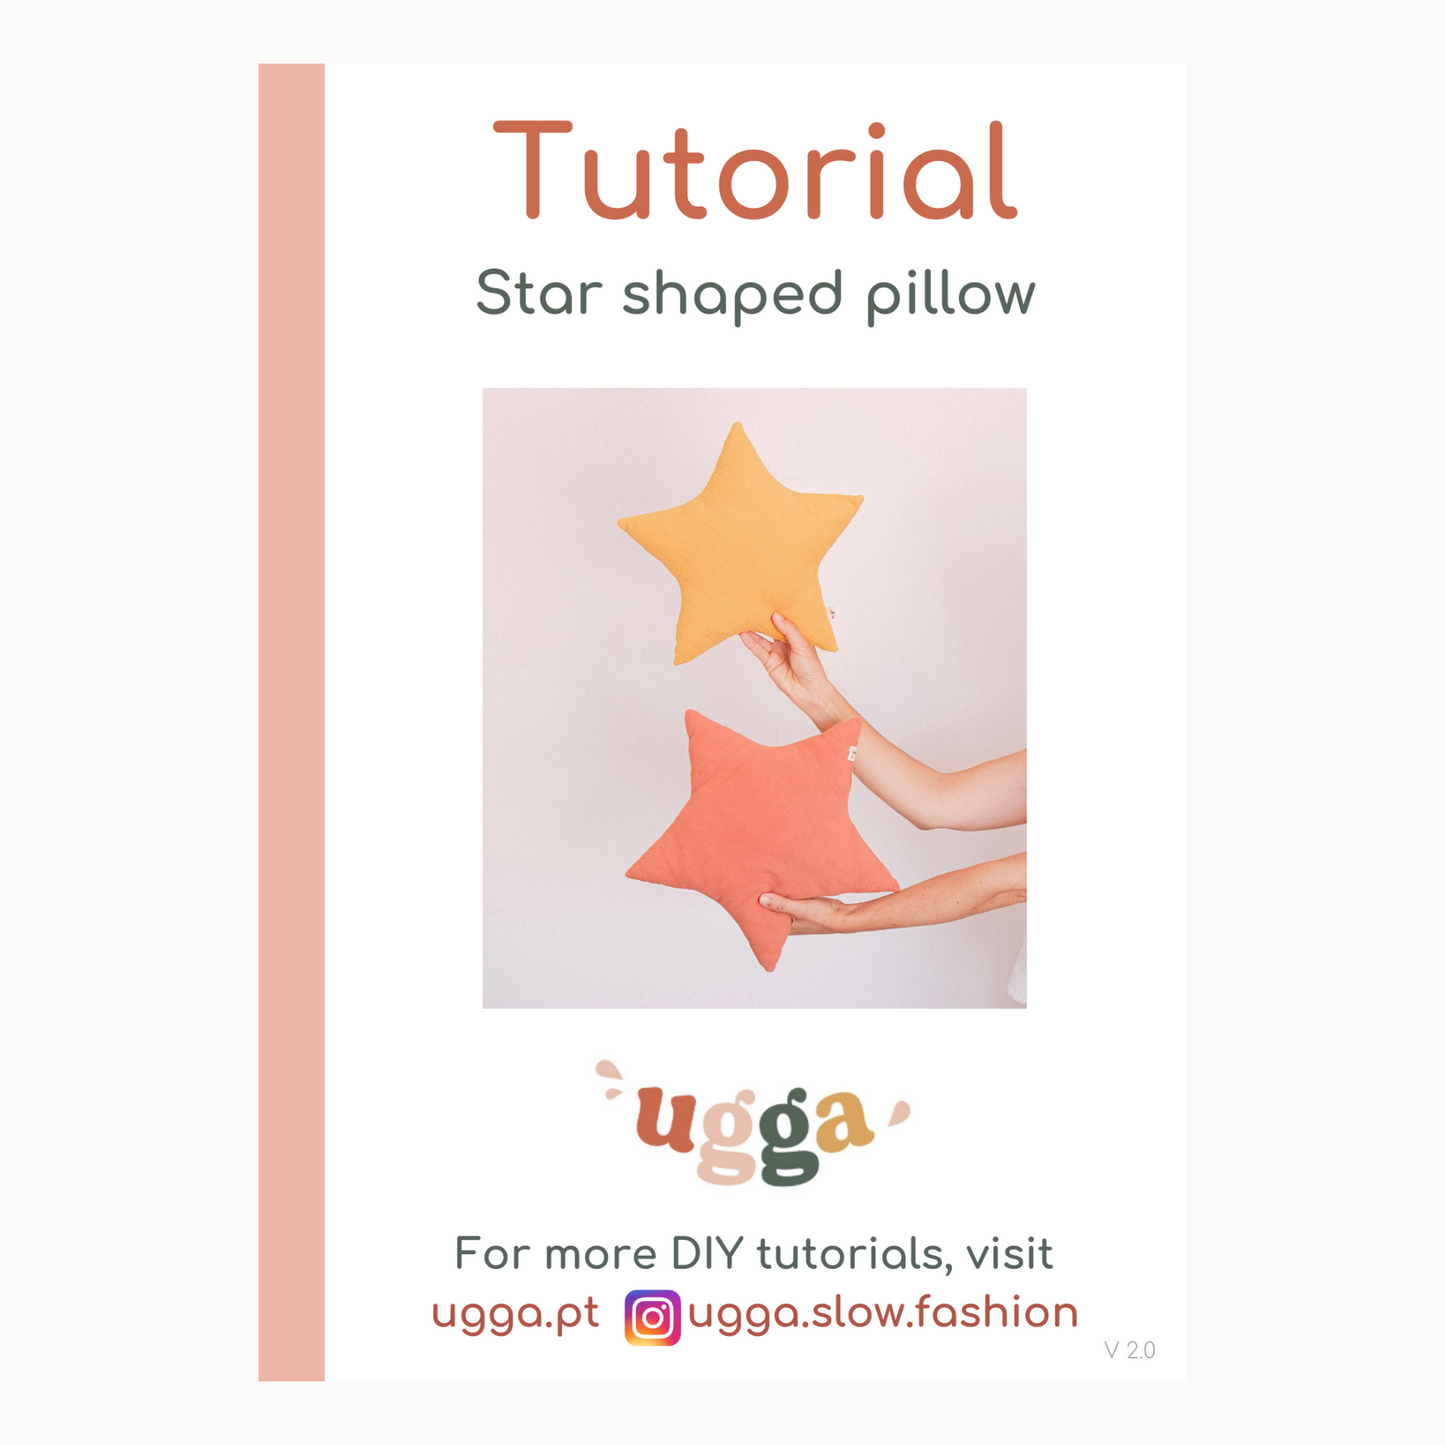 DIY Sewing Pattern and Tutorial - Pillow shaped star - Easy sewing project